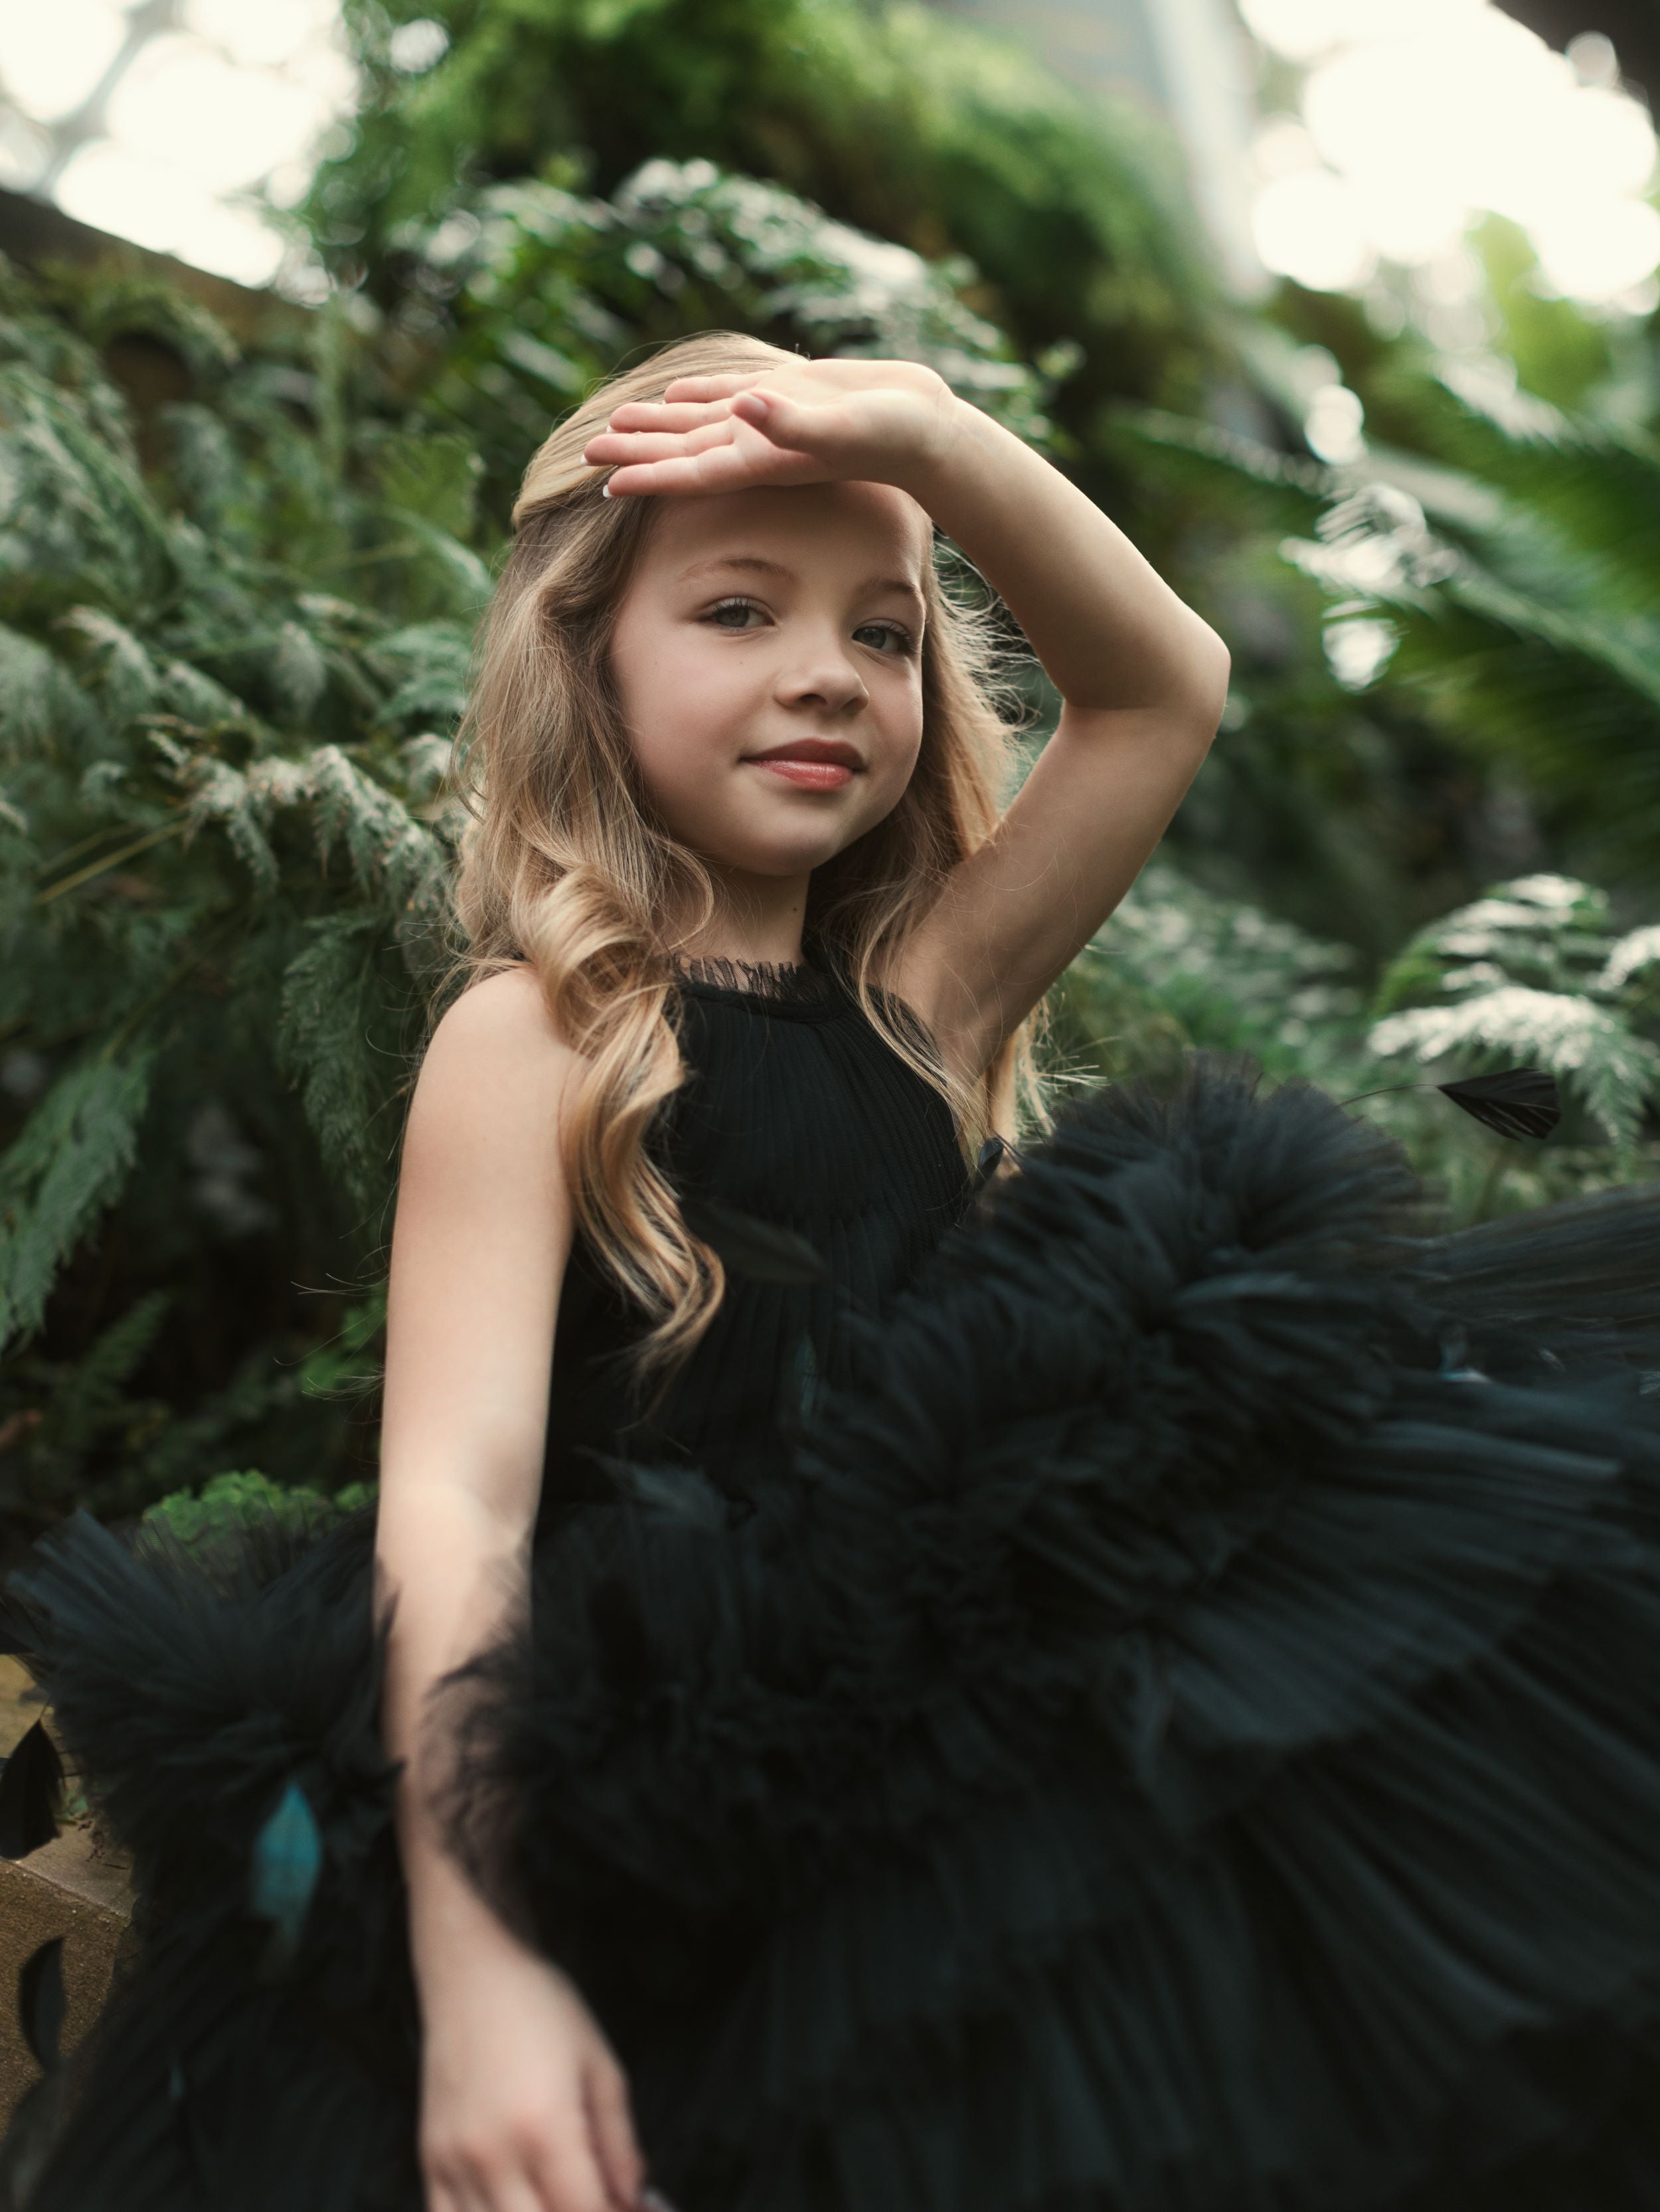 Girls High Neck Tulle Dress with Feather Detail